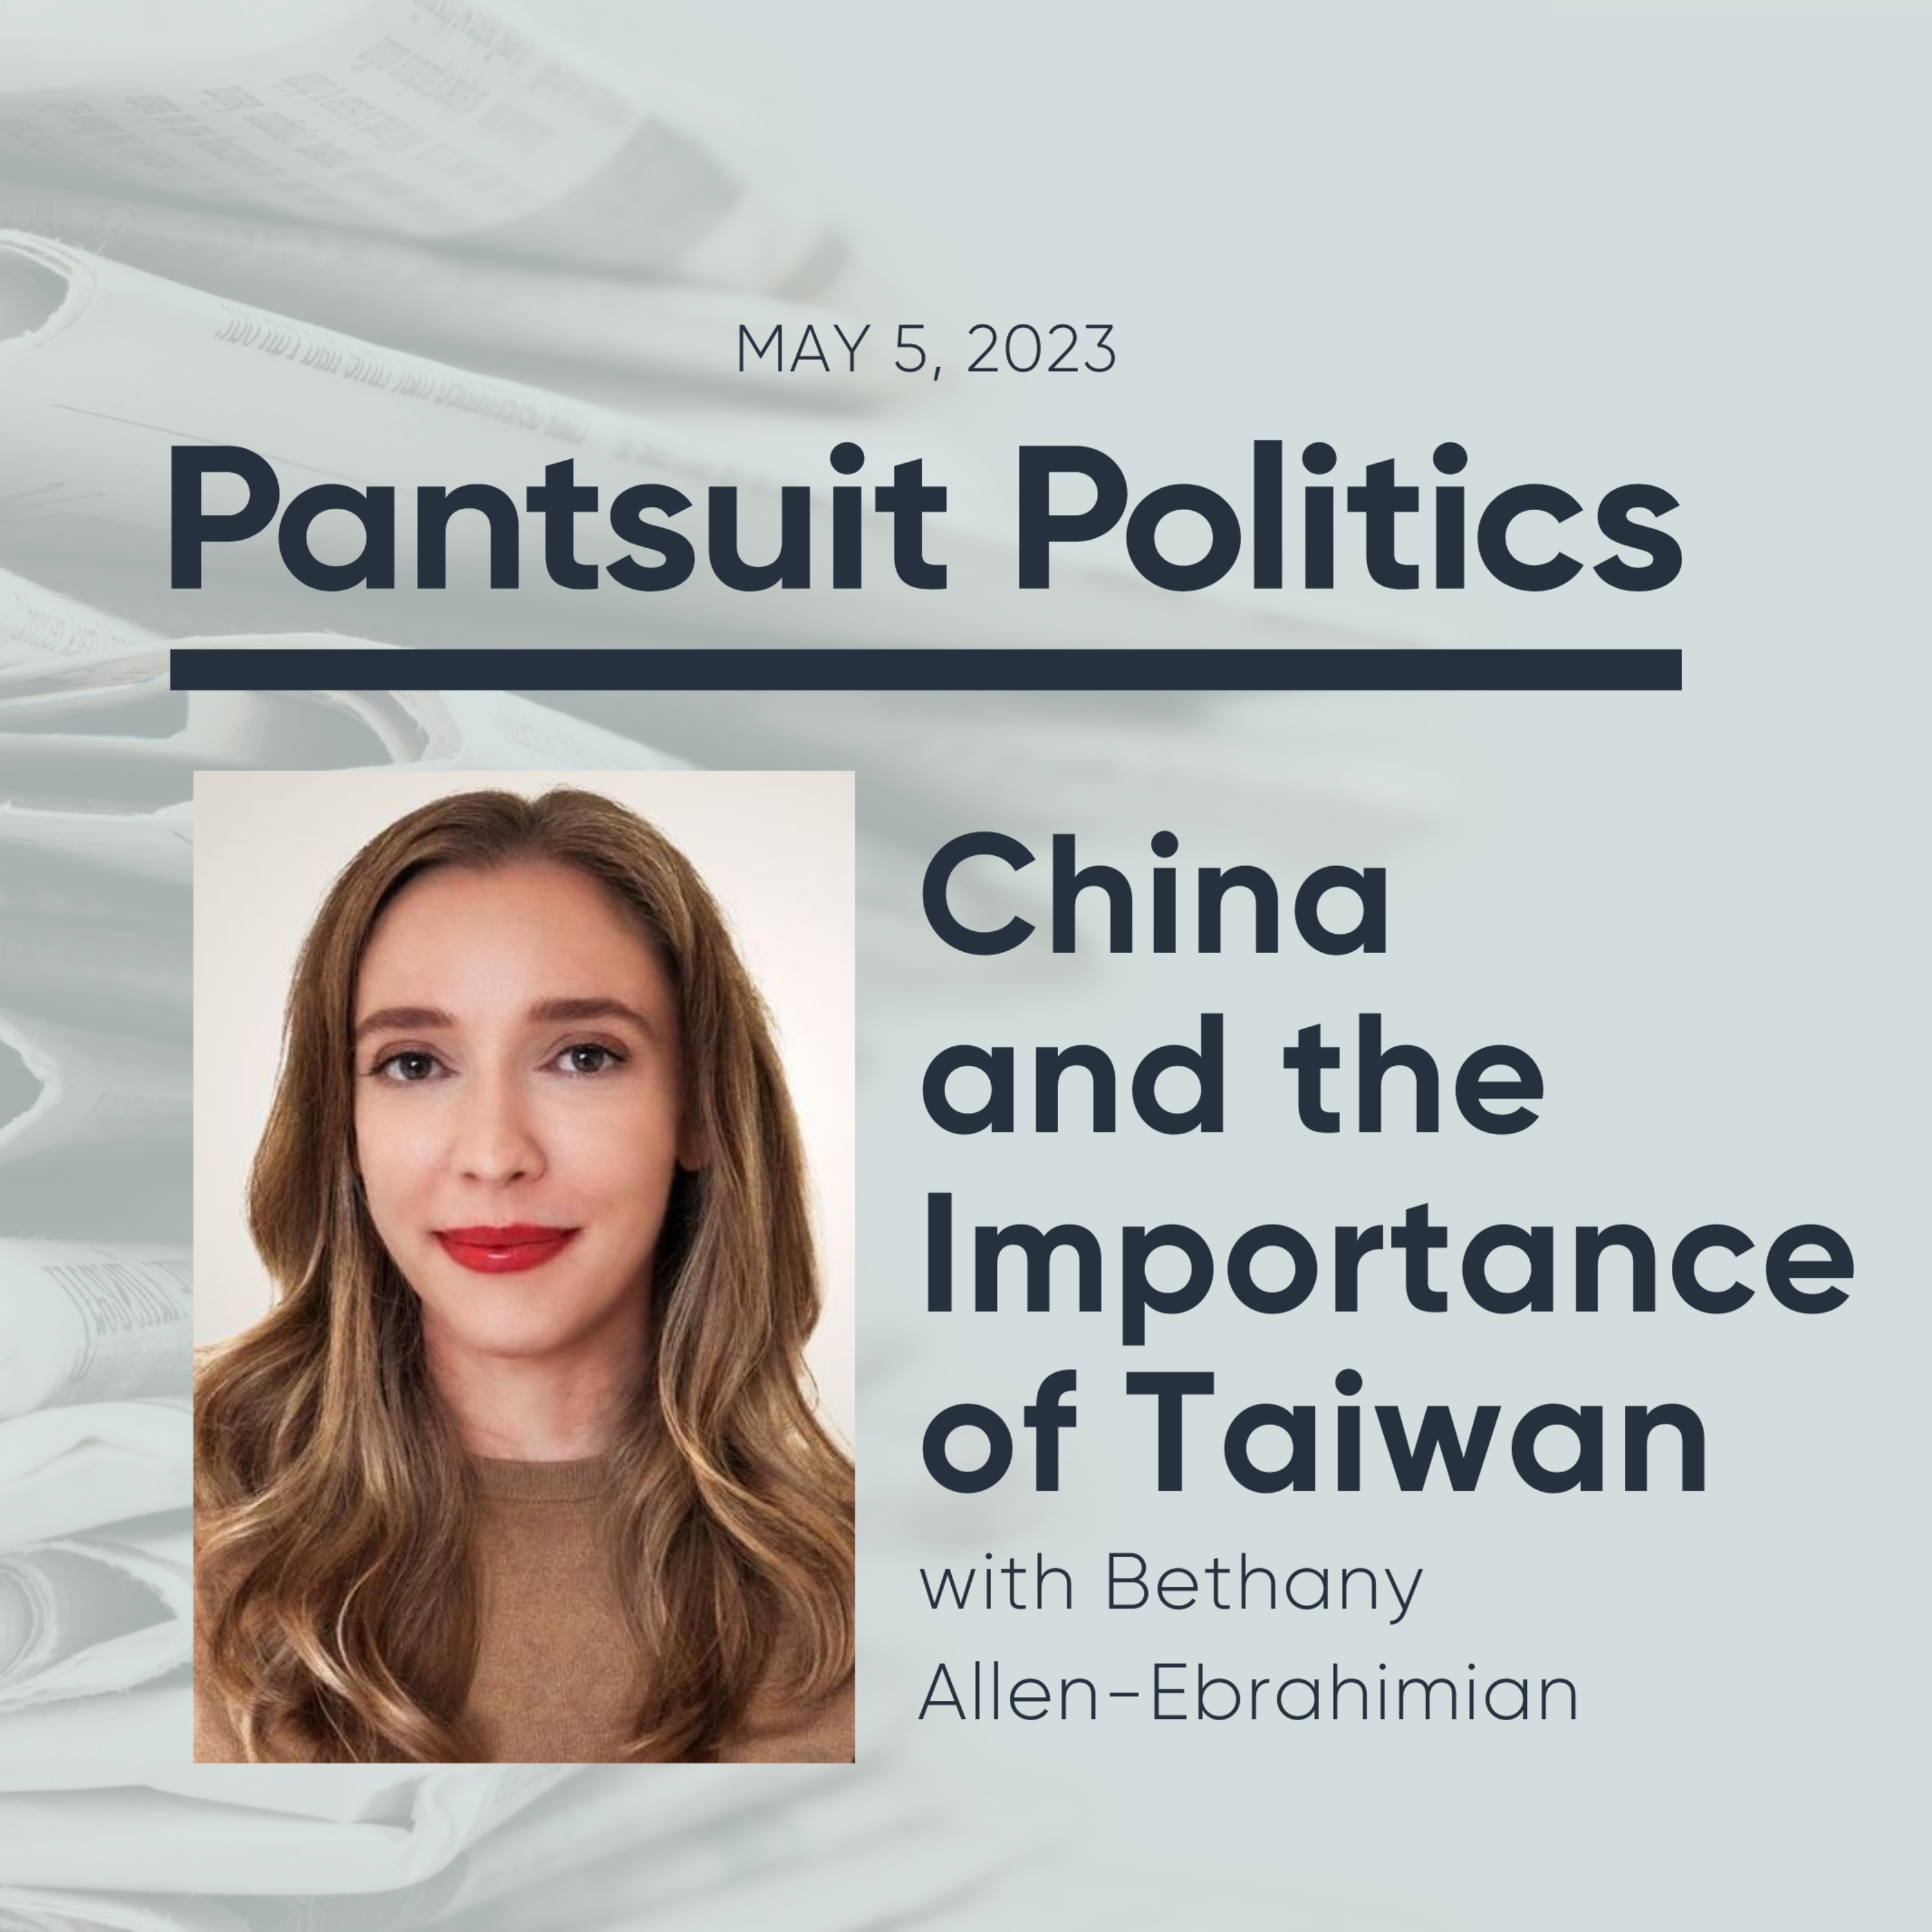 China and the Importance of Taiwan with Bethany Allen-Ebrahimian